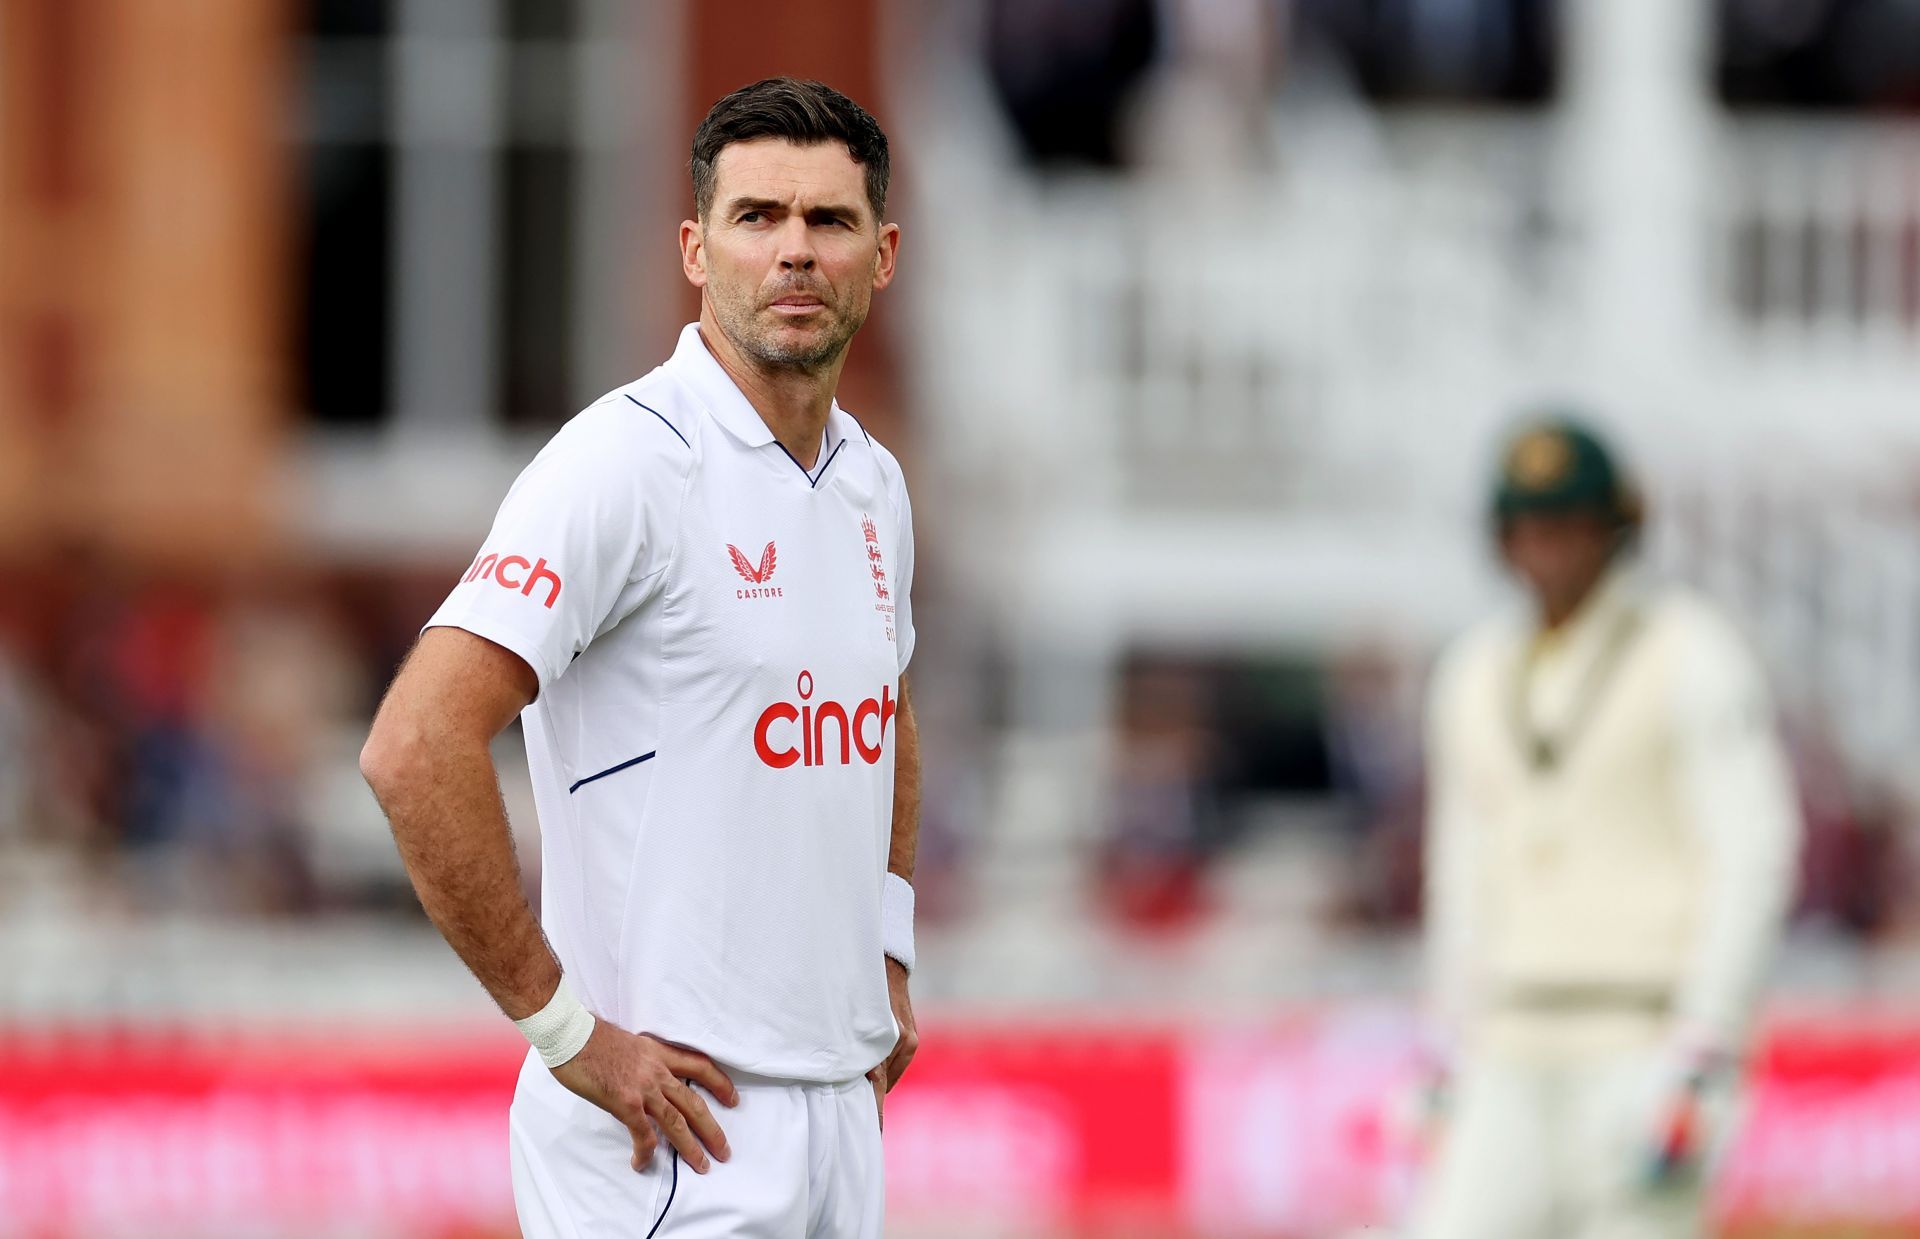 James Anderson has lacked the edge in first 2 Ashes Tests